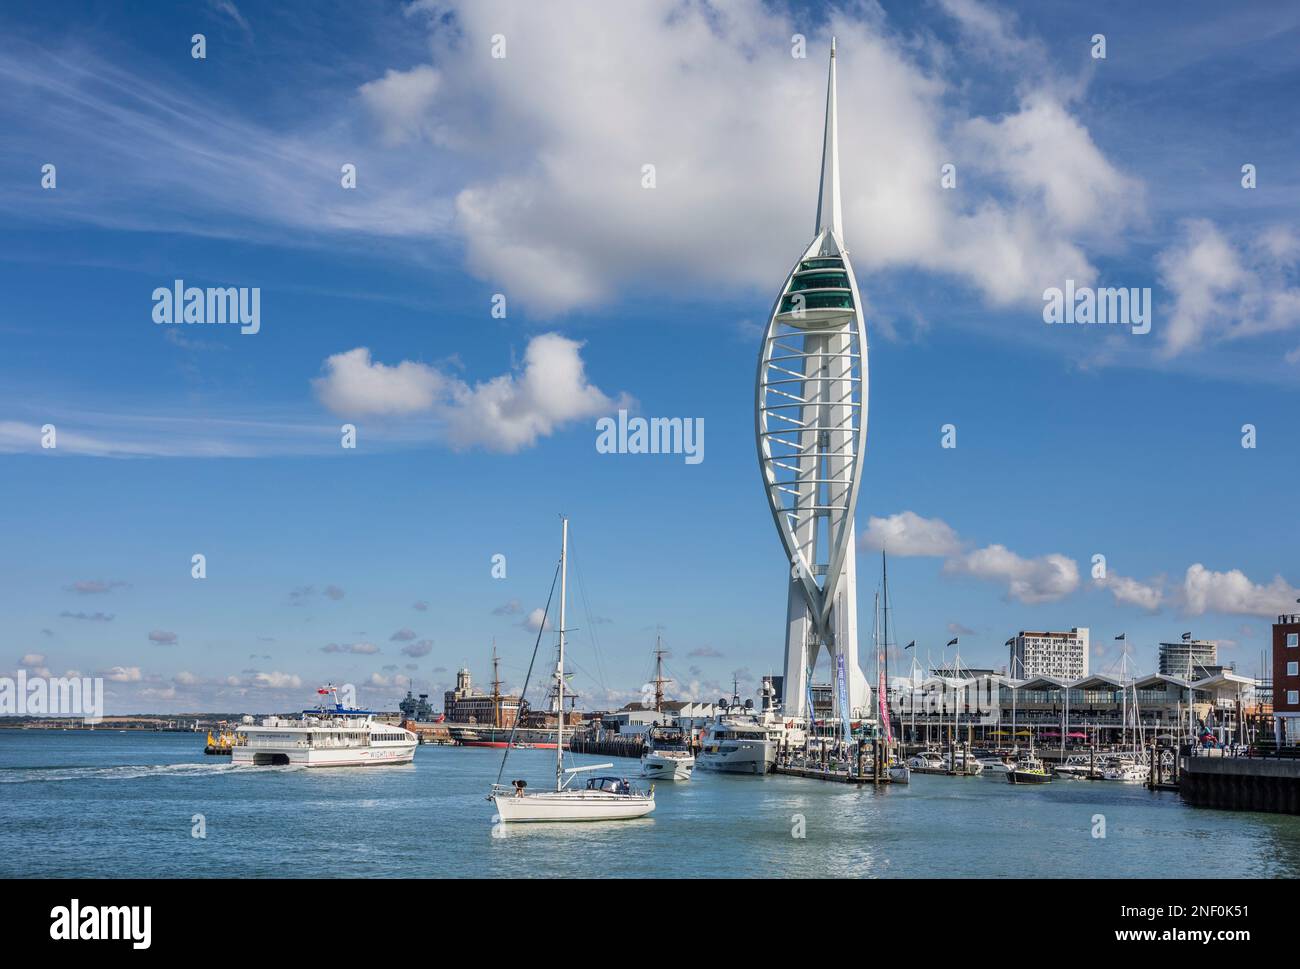 Spinnaker Tower in Portsmouth Harbour, the tower represents sails billowing in the wind, Hampshire, South East England Stock Photo